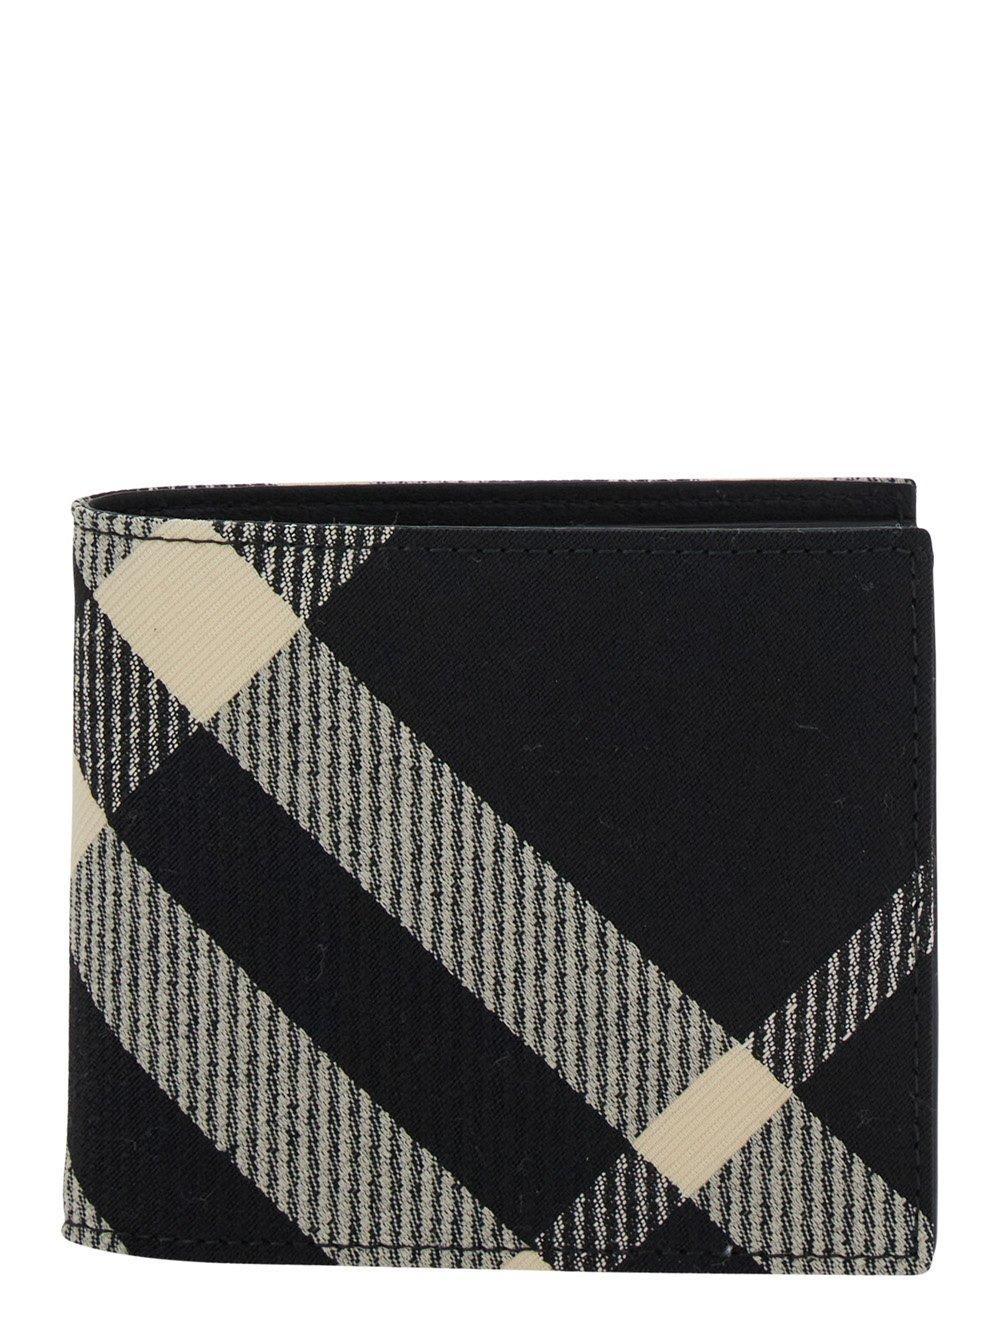 Burberry Check Patterned Bi-fold Wallet In Black Calico